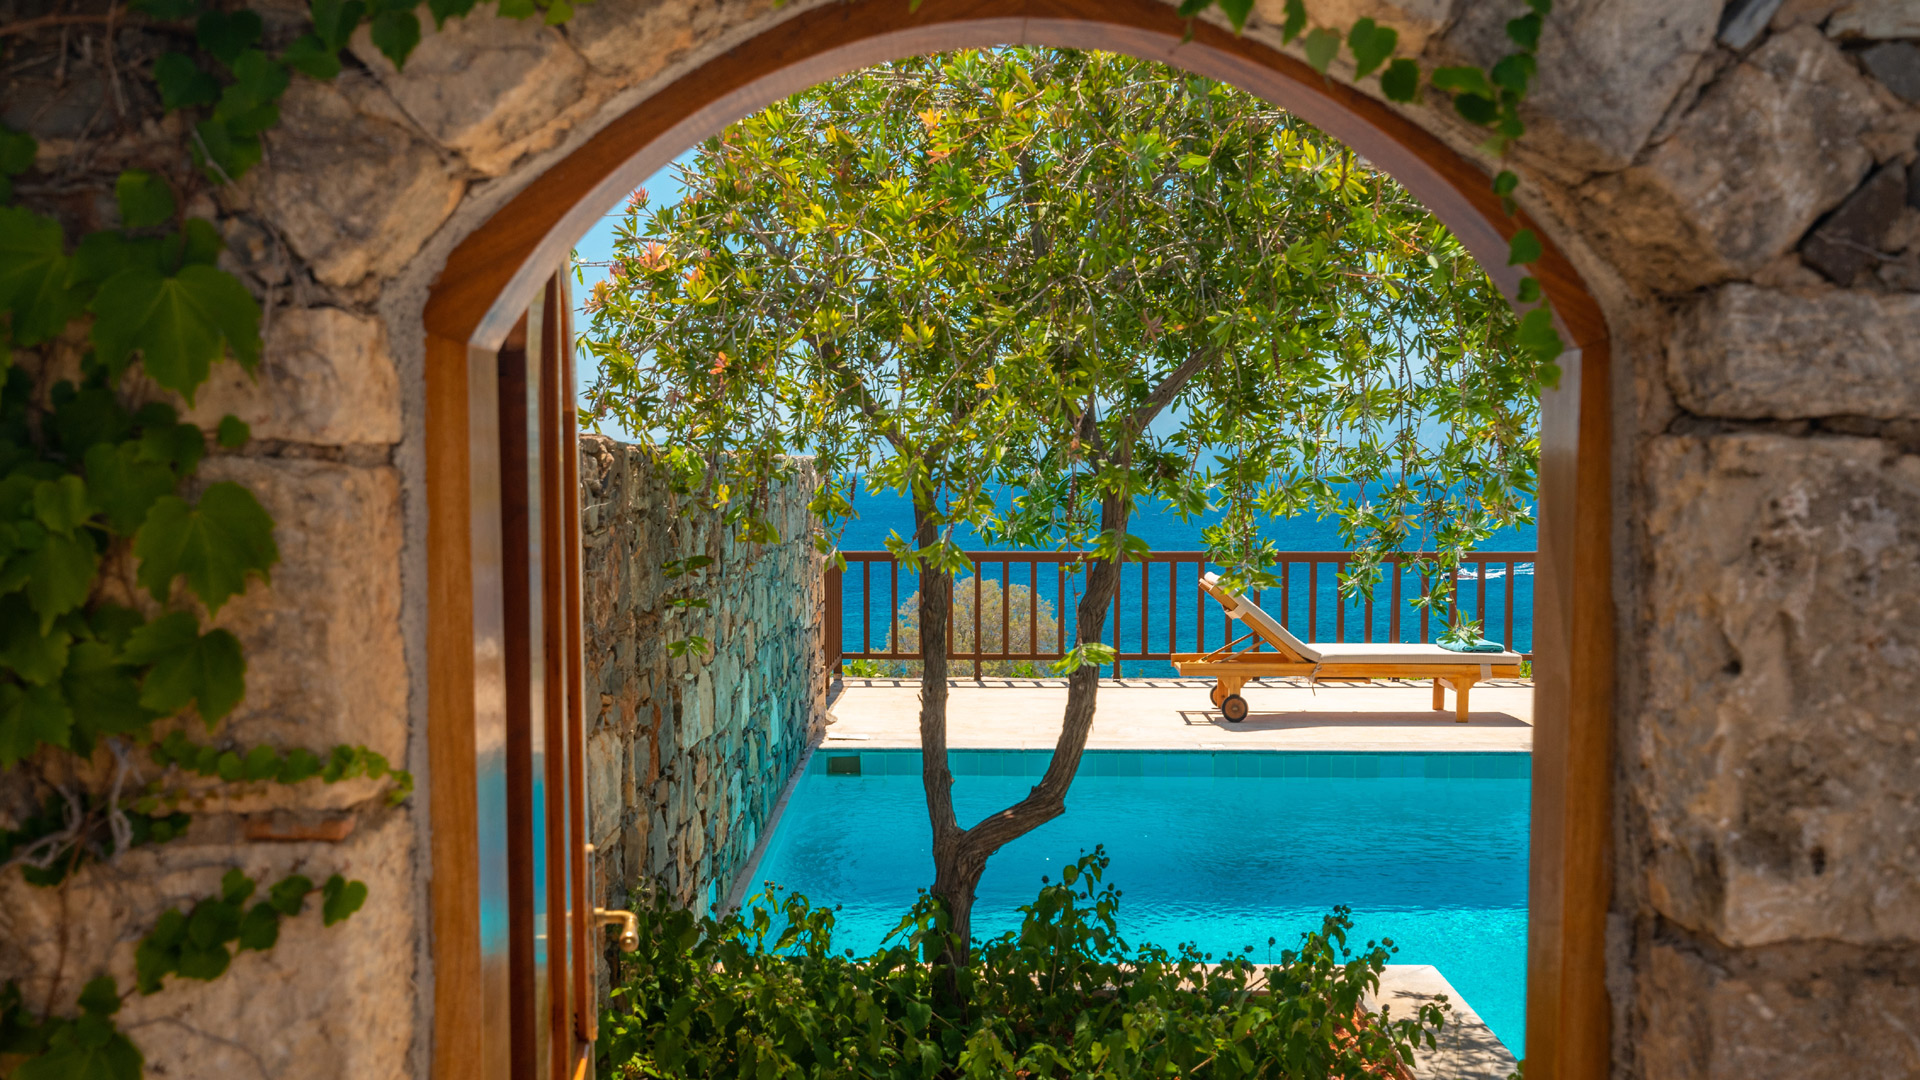 Two Bedroom Superior Bungalow Private Pool Sea View, Elounda Mare Relais & Châteaux Hotel, Crete